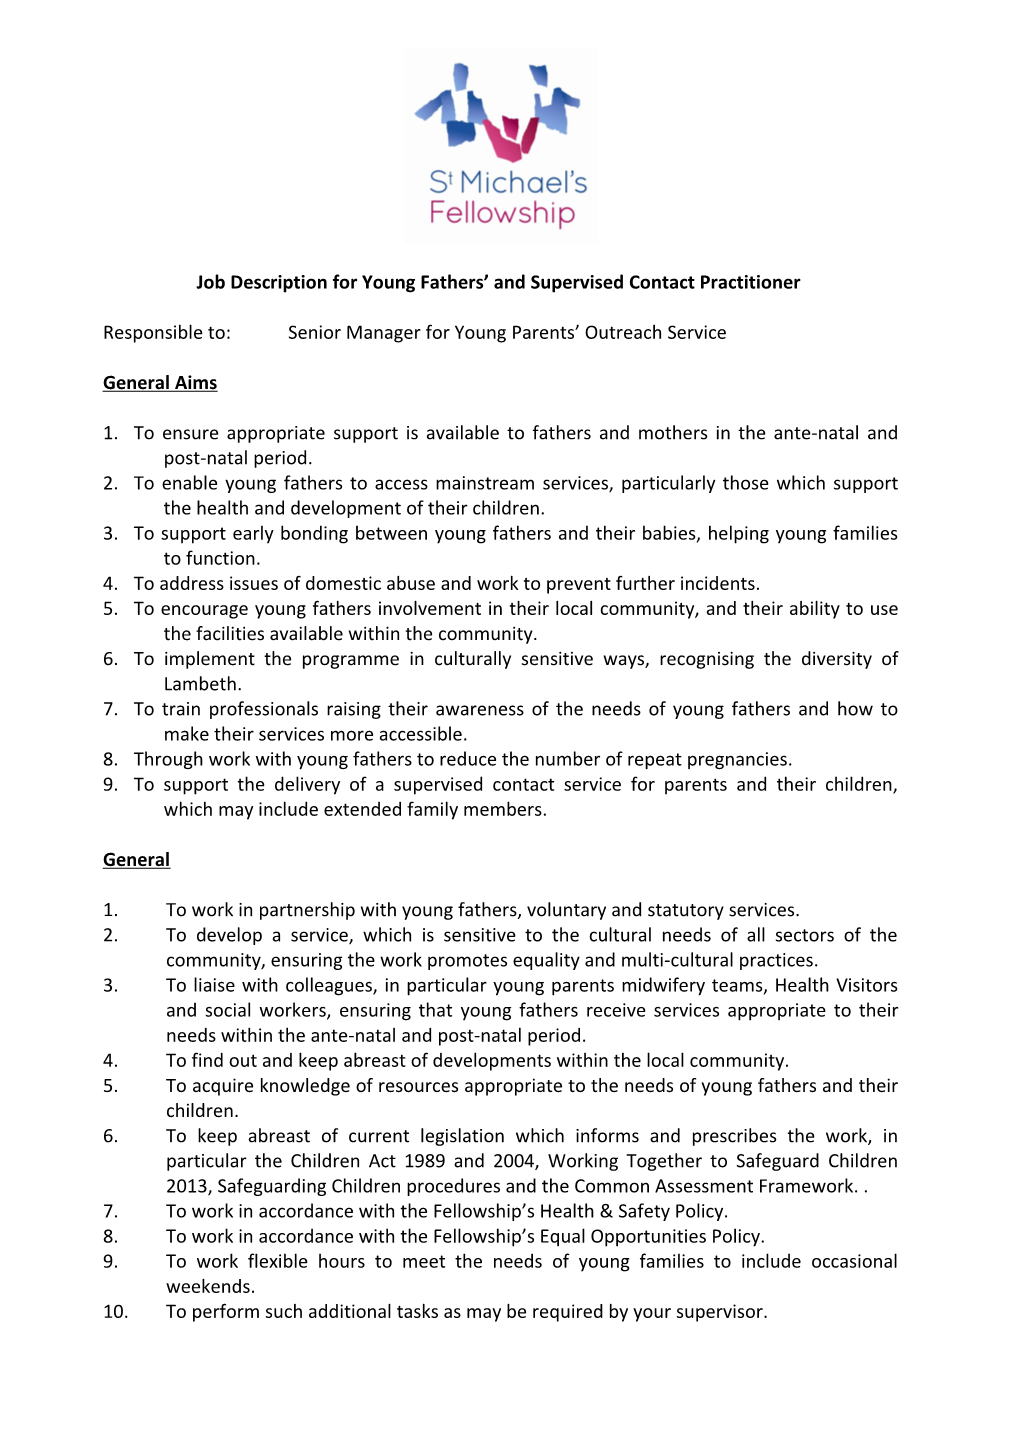 Job Description for Young Fathers Worker